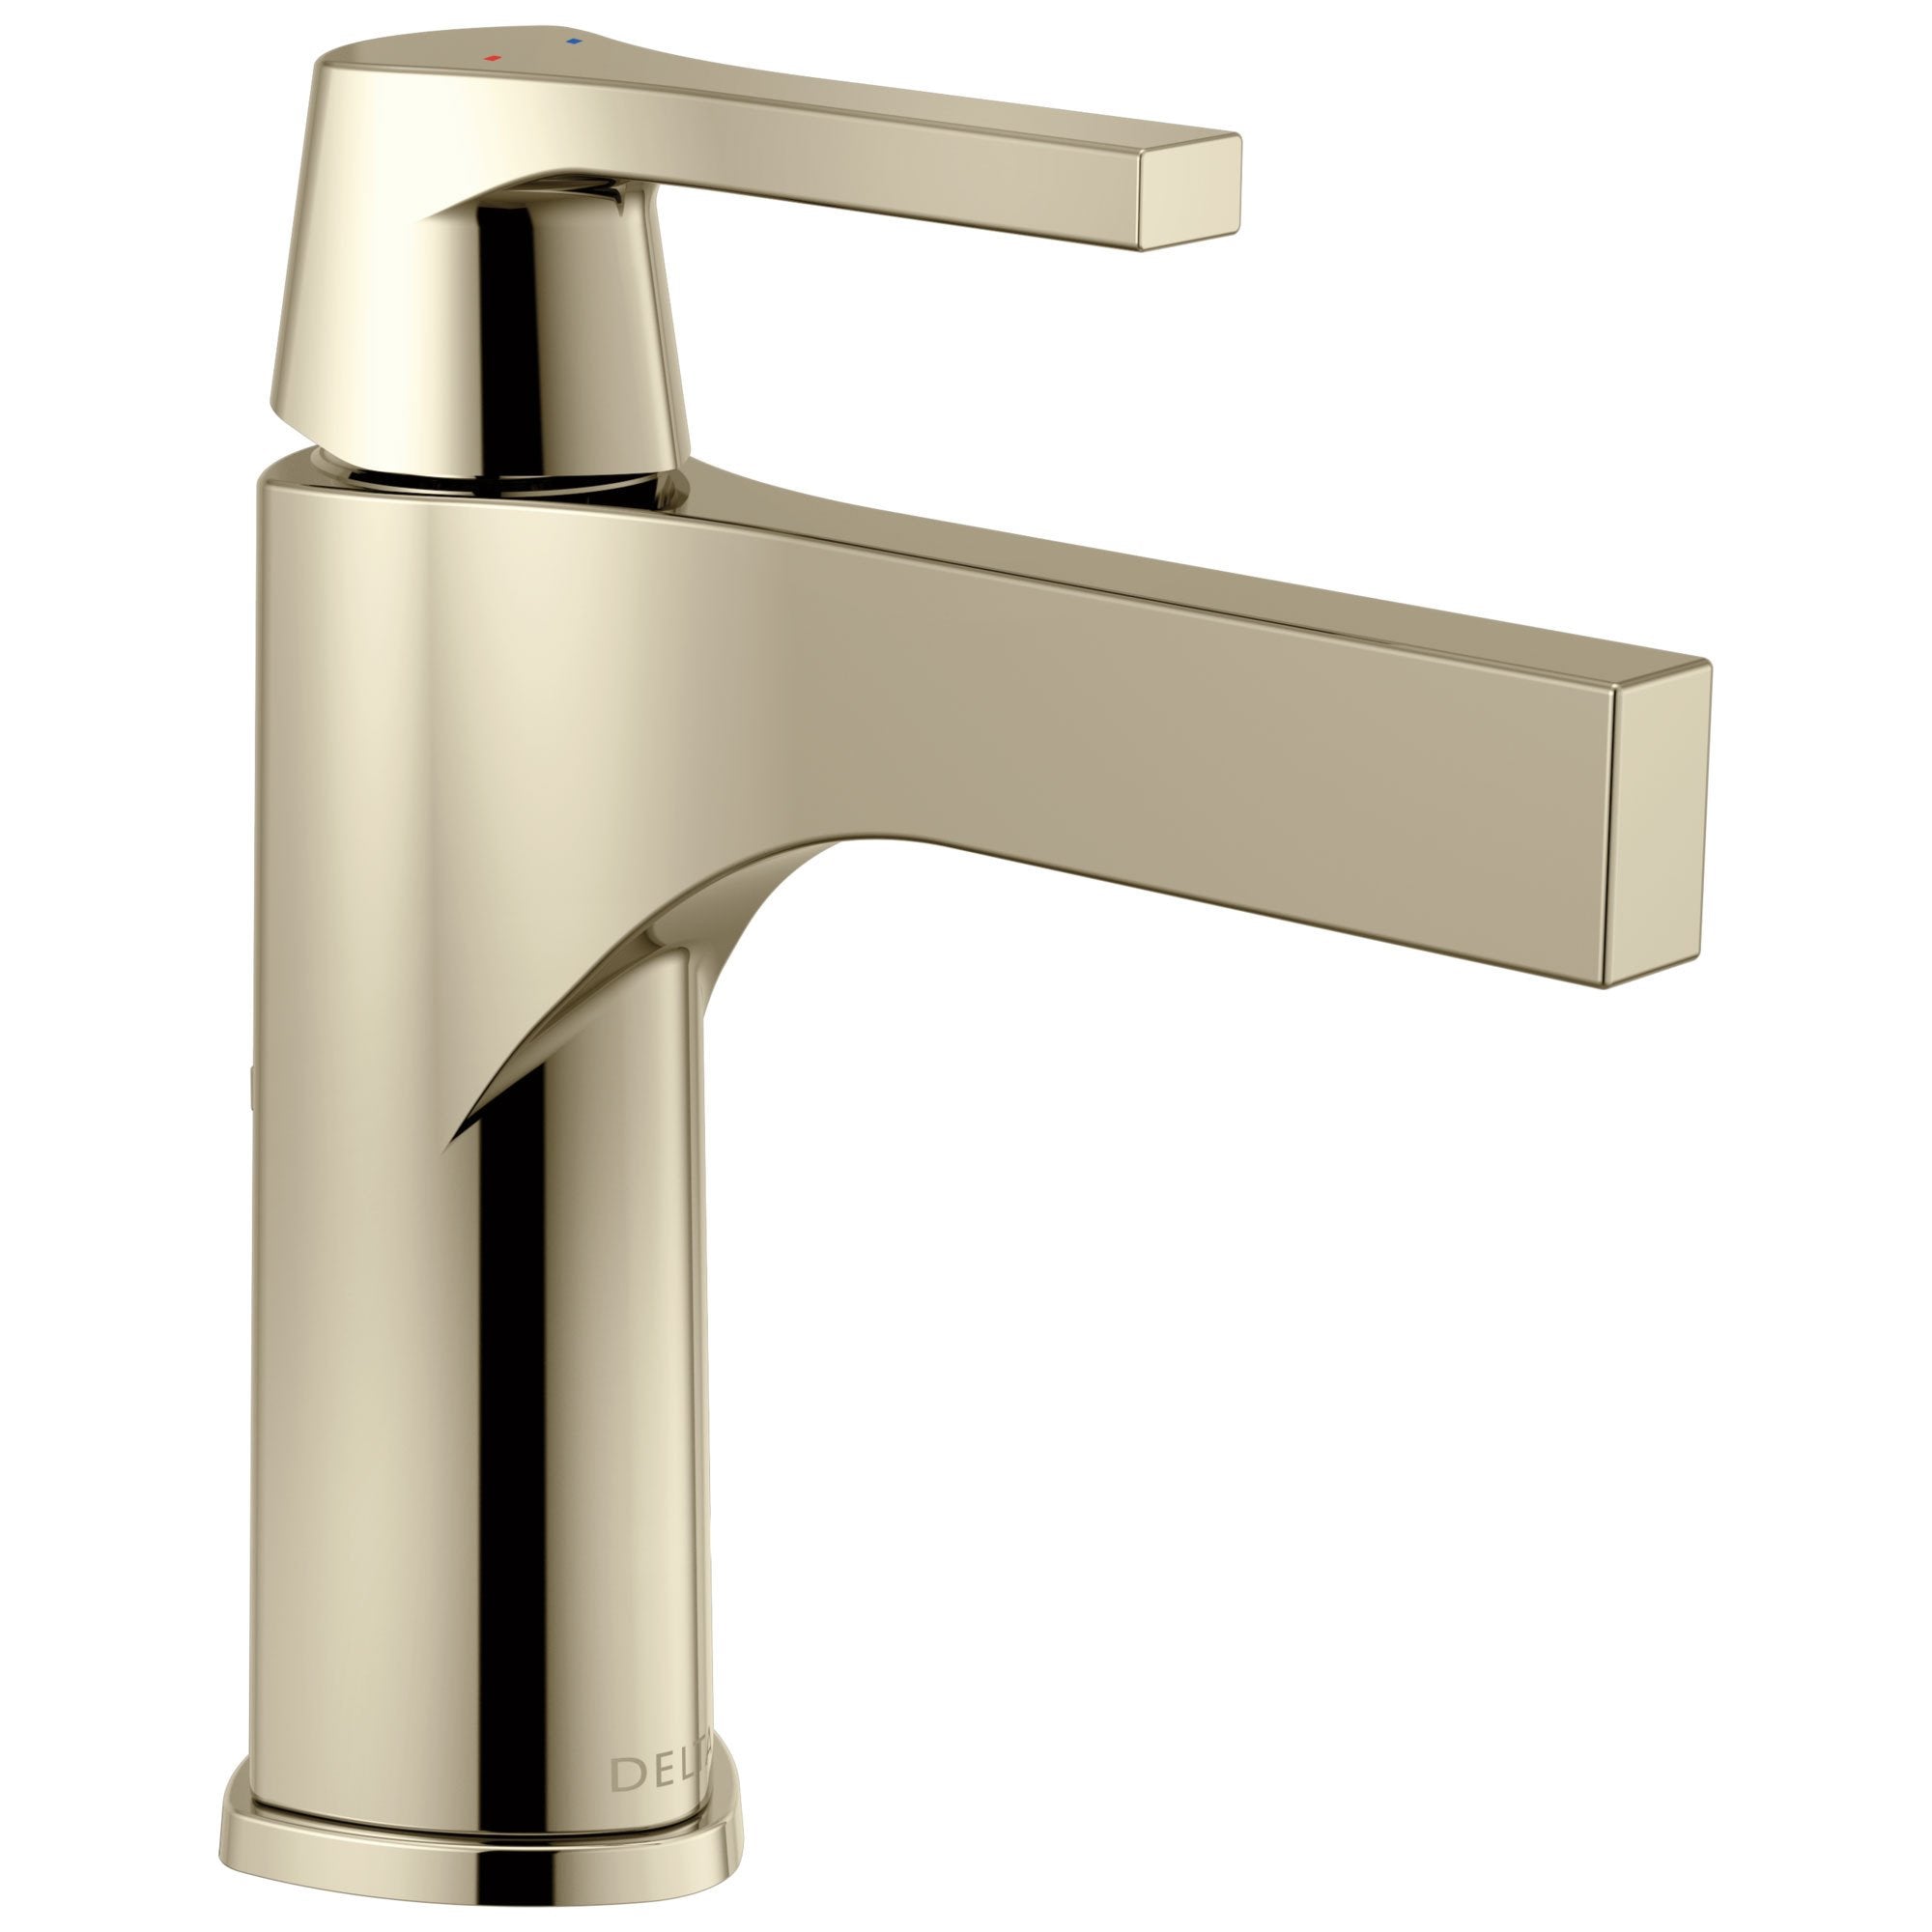 Delta Zura Collection Polished Nickel Finish Single Handle Modern One Hole Bathroom Lavatory Sink Faucet with Metal Pop-up Drain 743893